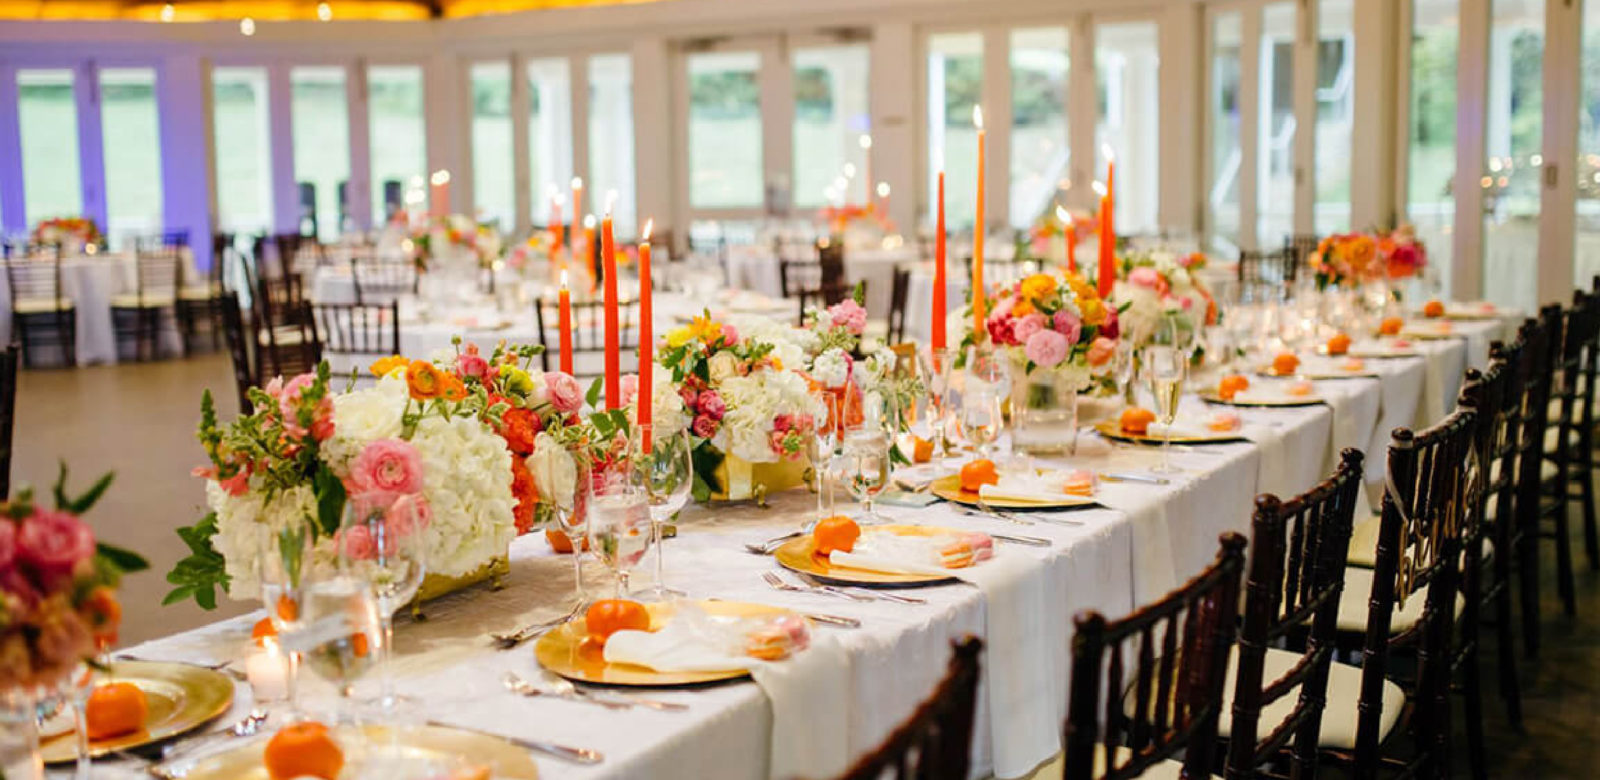 Table setting for a wedding with orange accents at Airlie